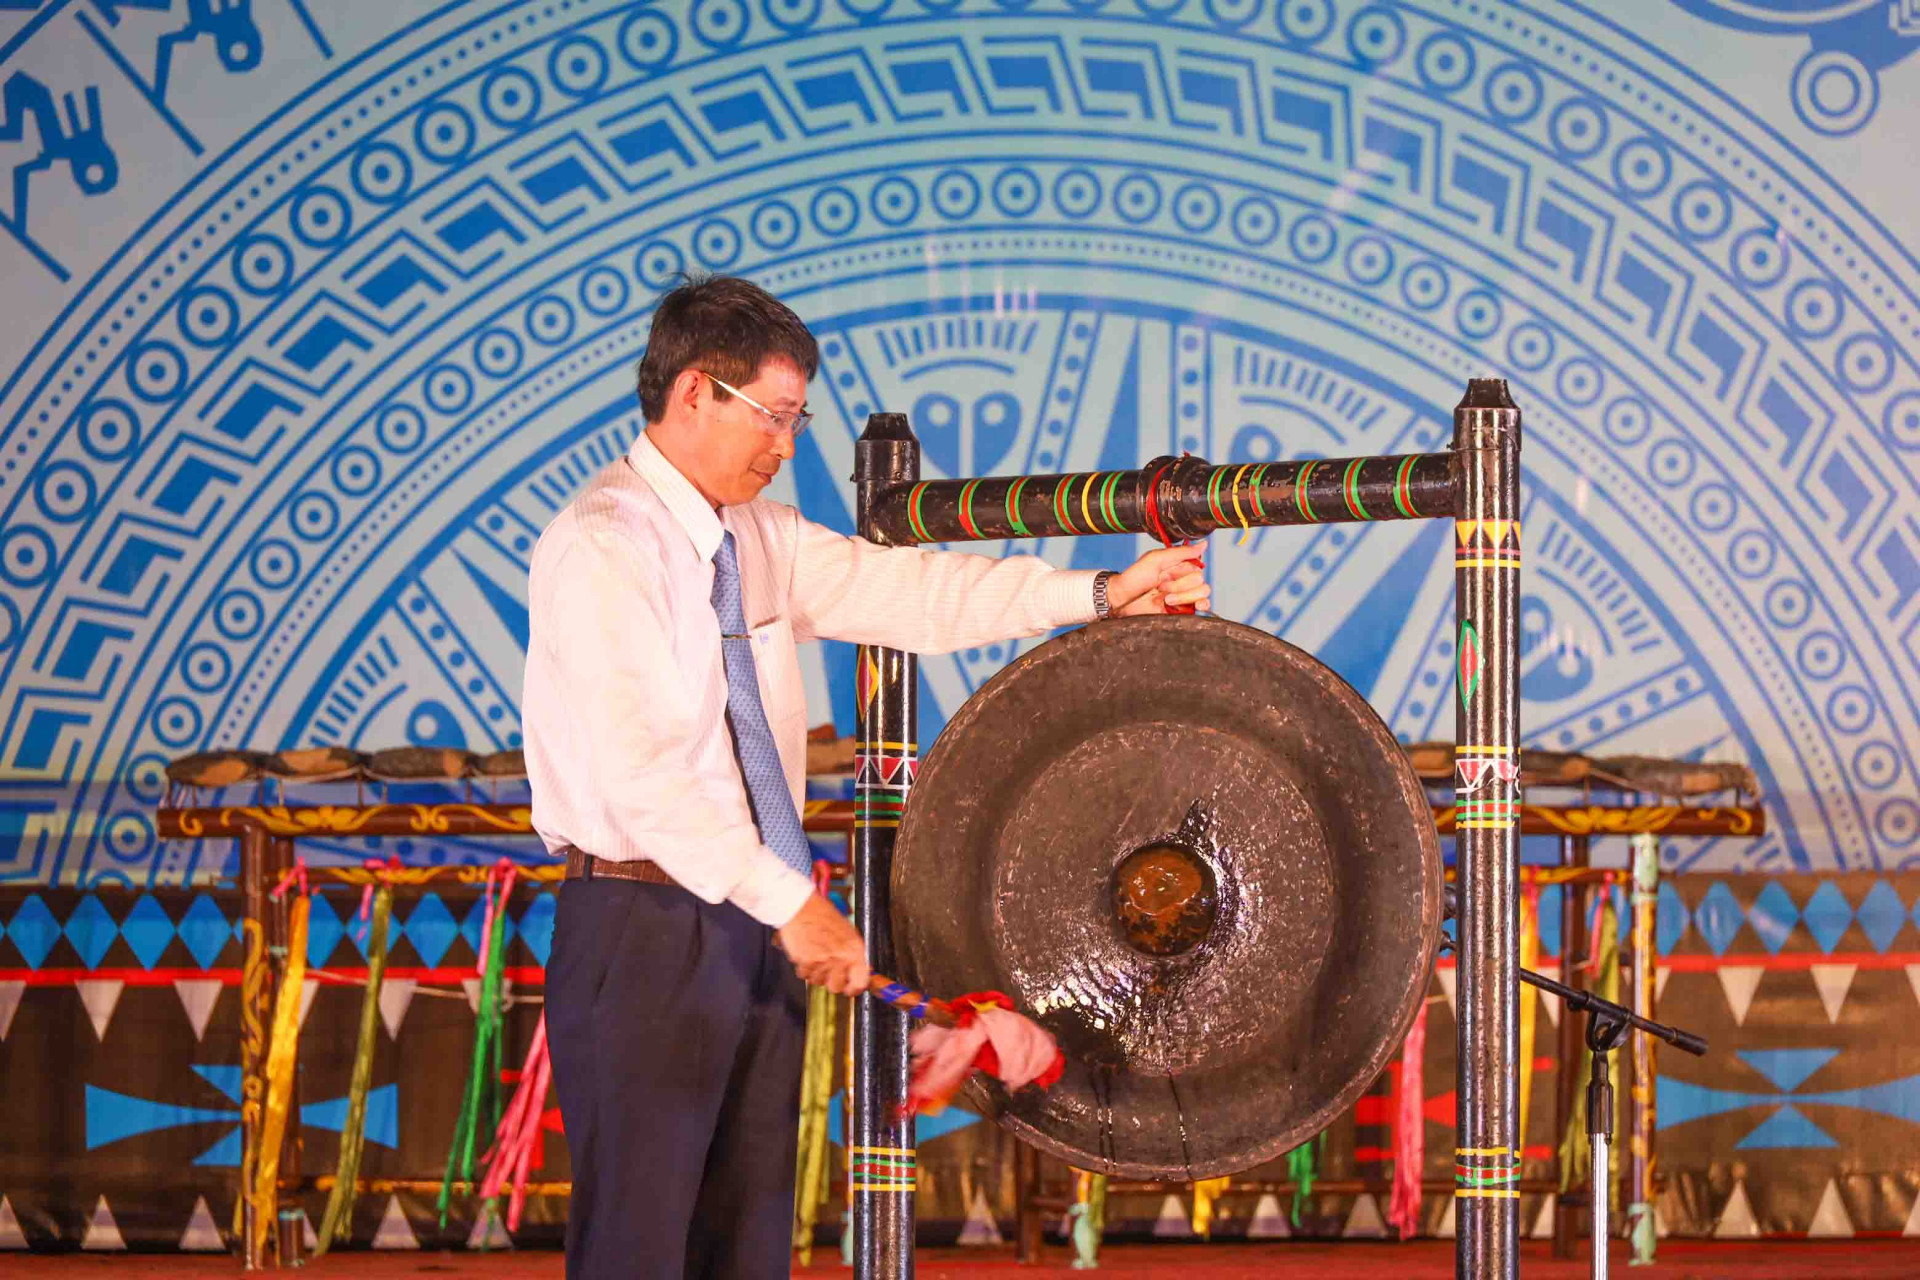 Dinh Van Thieu beating gong to open the 2022 Vietnam Ethnic Groups’ Cultural Day in Khanh Hoa